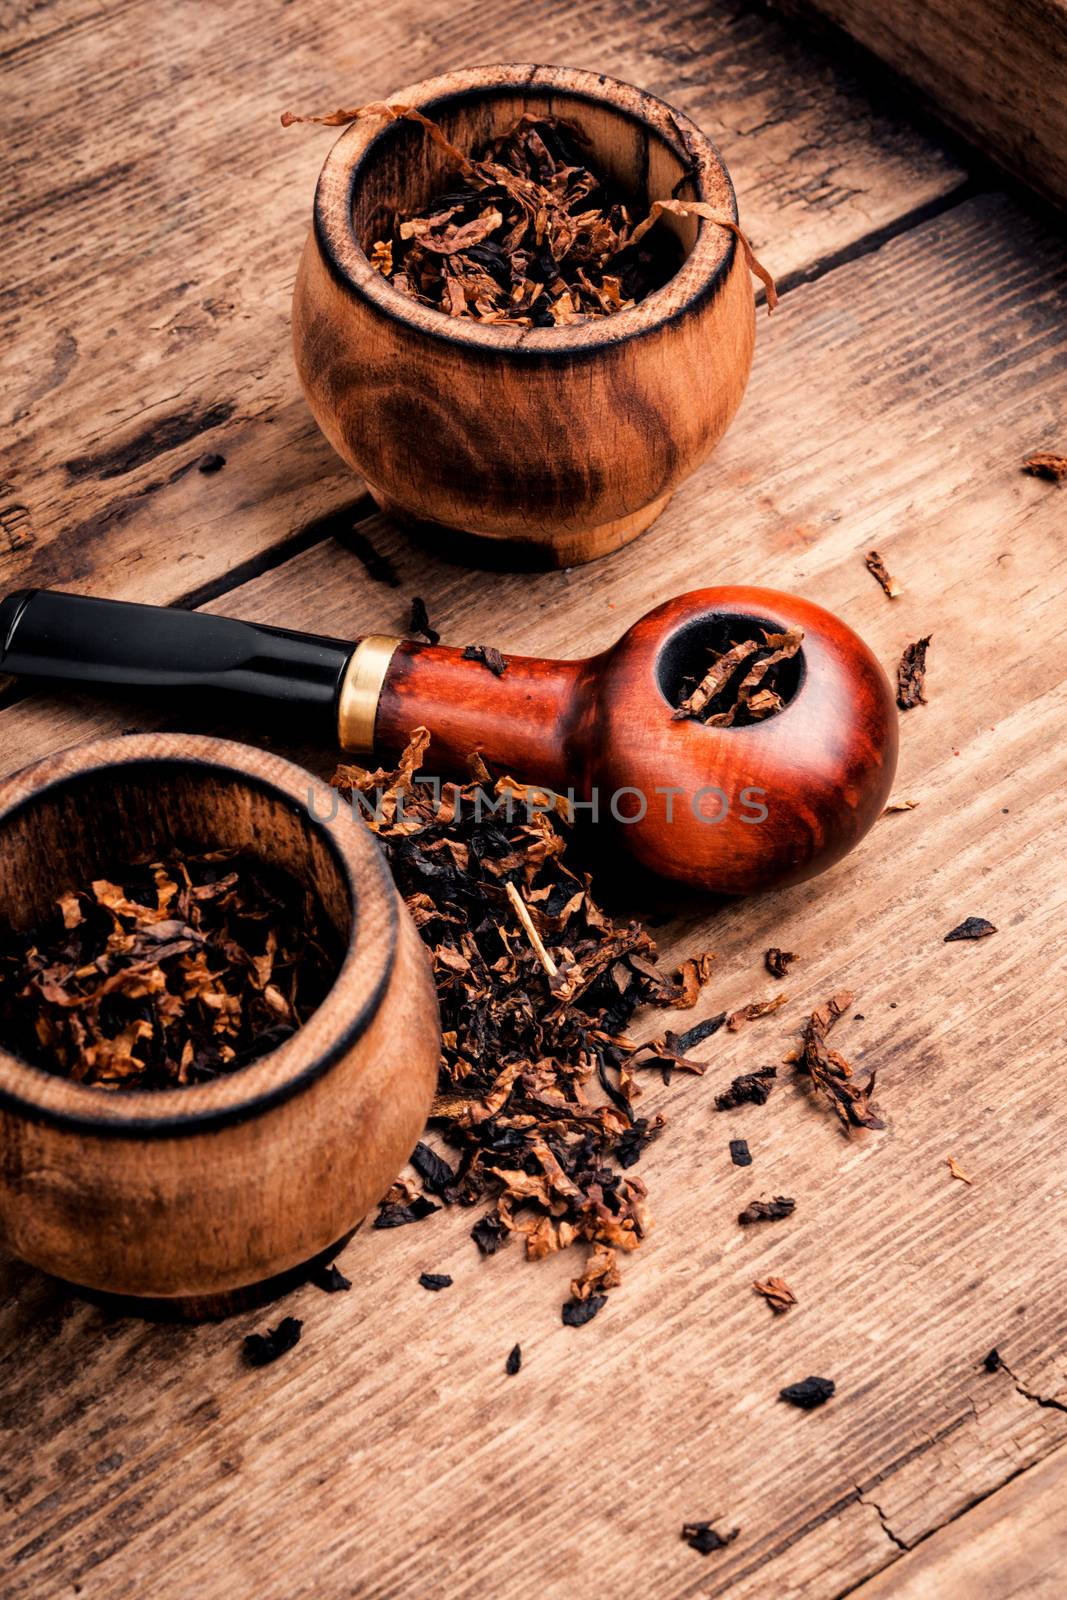 Tobacco pipes for smoking tobacco by LMykola